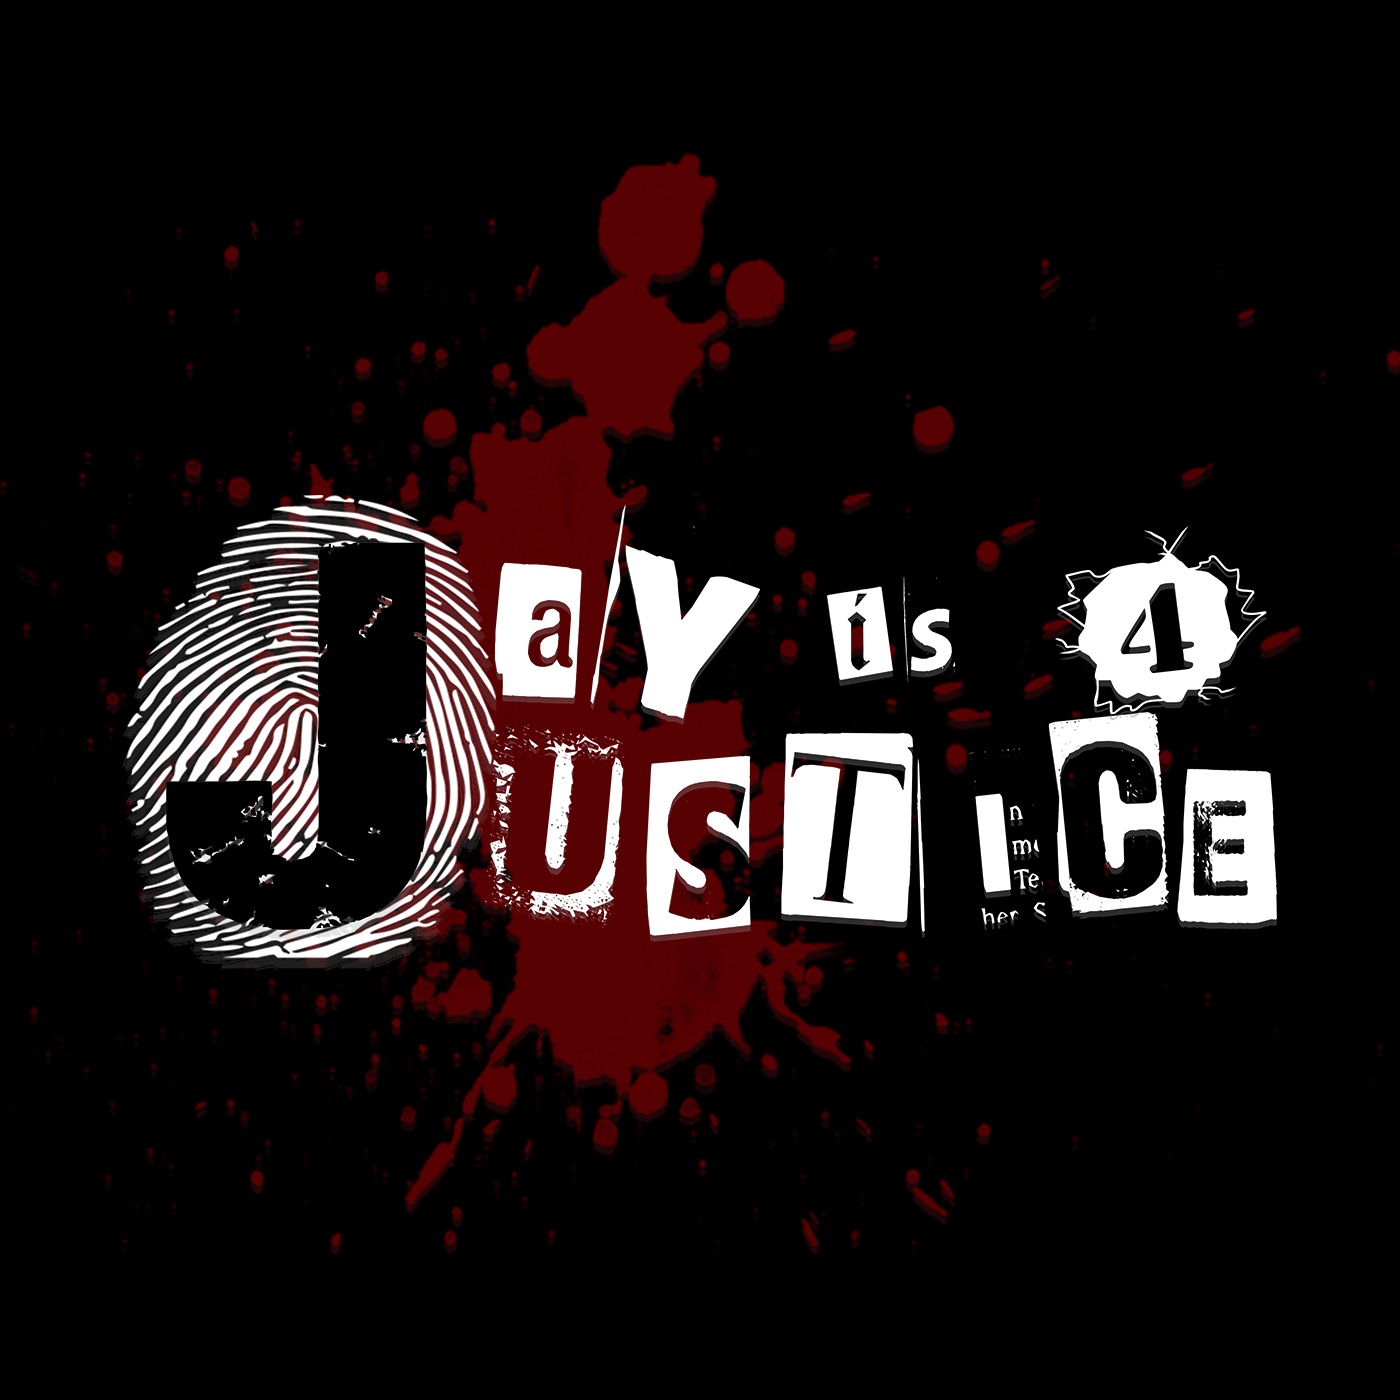 Epi 13: Part 2: The Mysterious Death of Marcus Merritt Sr. - A Mother's Journey for Justice